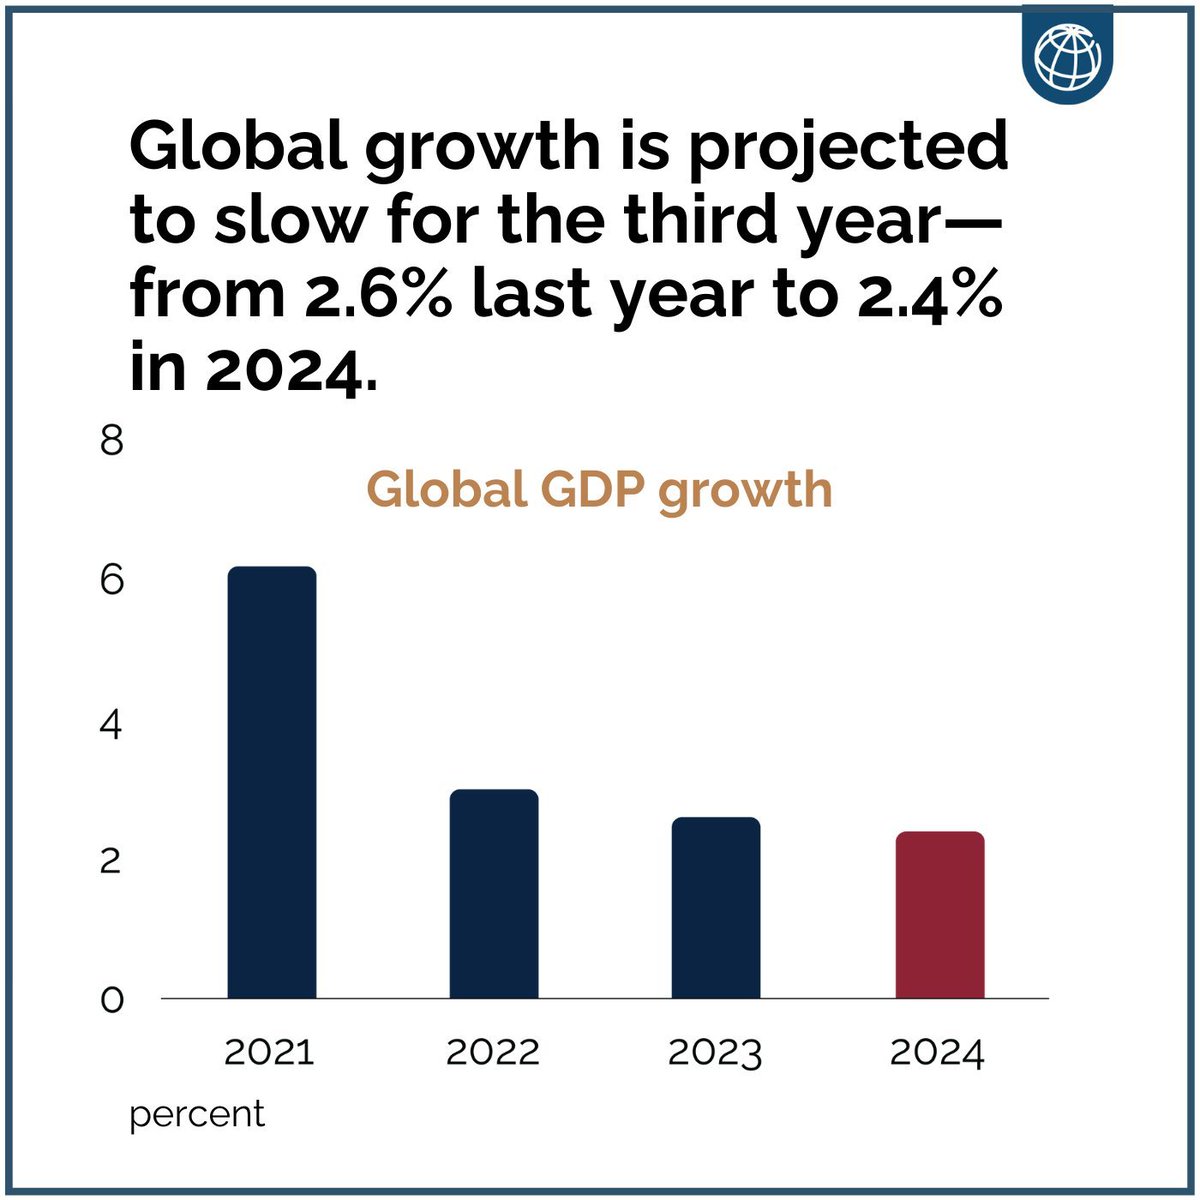 Global growth is projected to slow for the third year in a row – from 2.6% last year to 2.4% in 2024.

Latest data from the @WorldBank indicates the global economy is facing its slowest half-decade of GDP growth in 30 years. worldbank.org/en/publication… #GEP2024